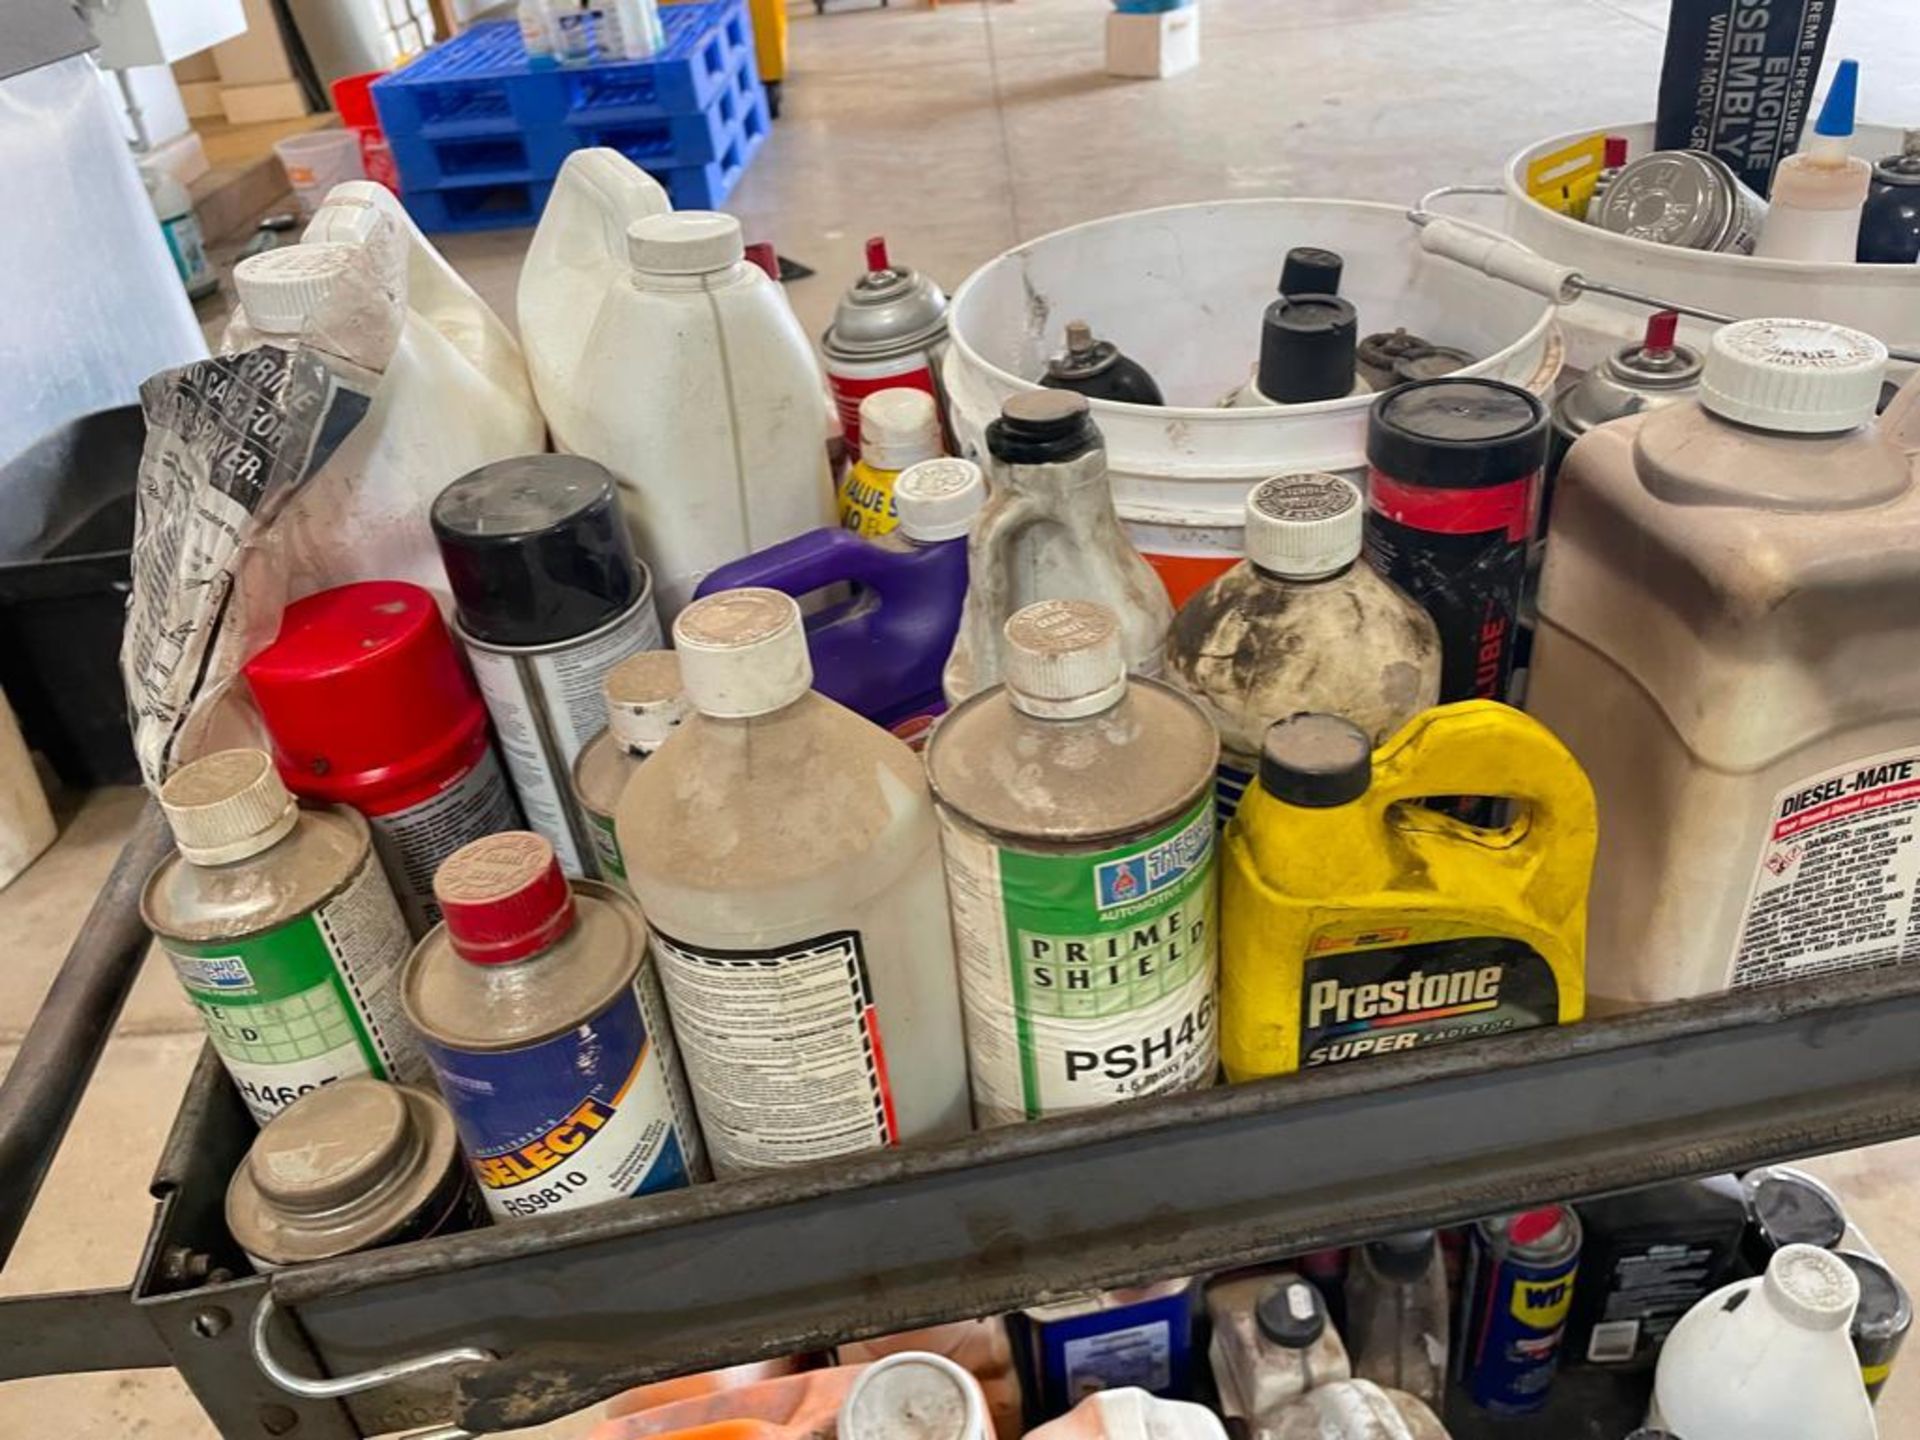 Cart of Shop Cleaning Chemicals & Supplies. Located in Hazelwood, MO - Image 10 of 11